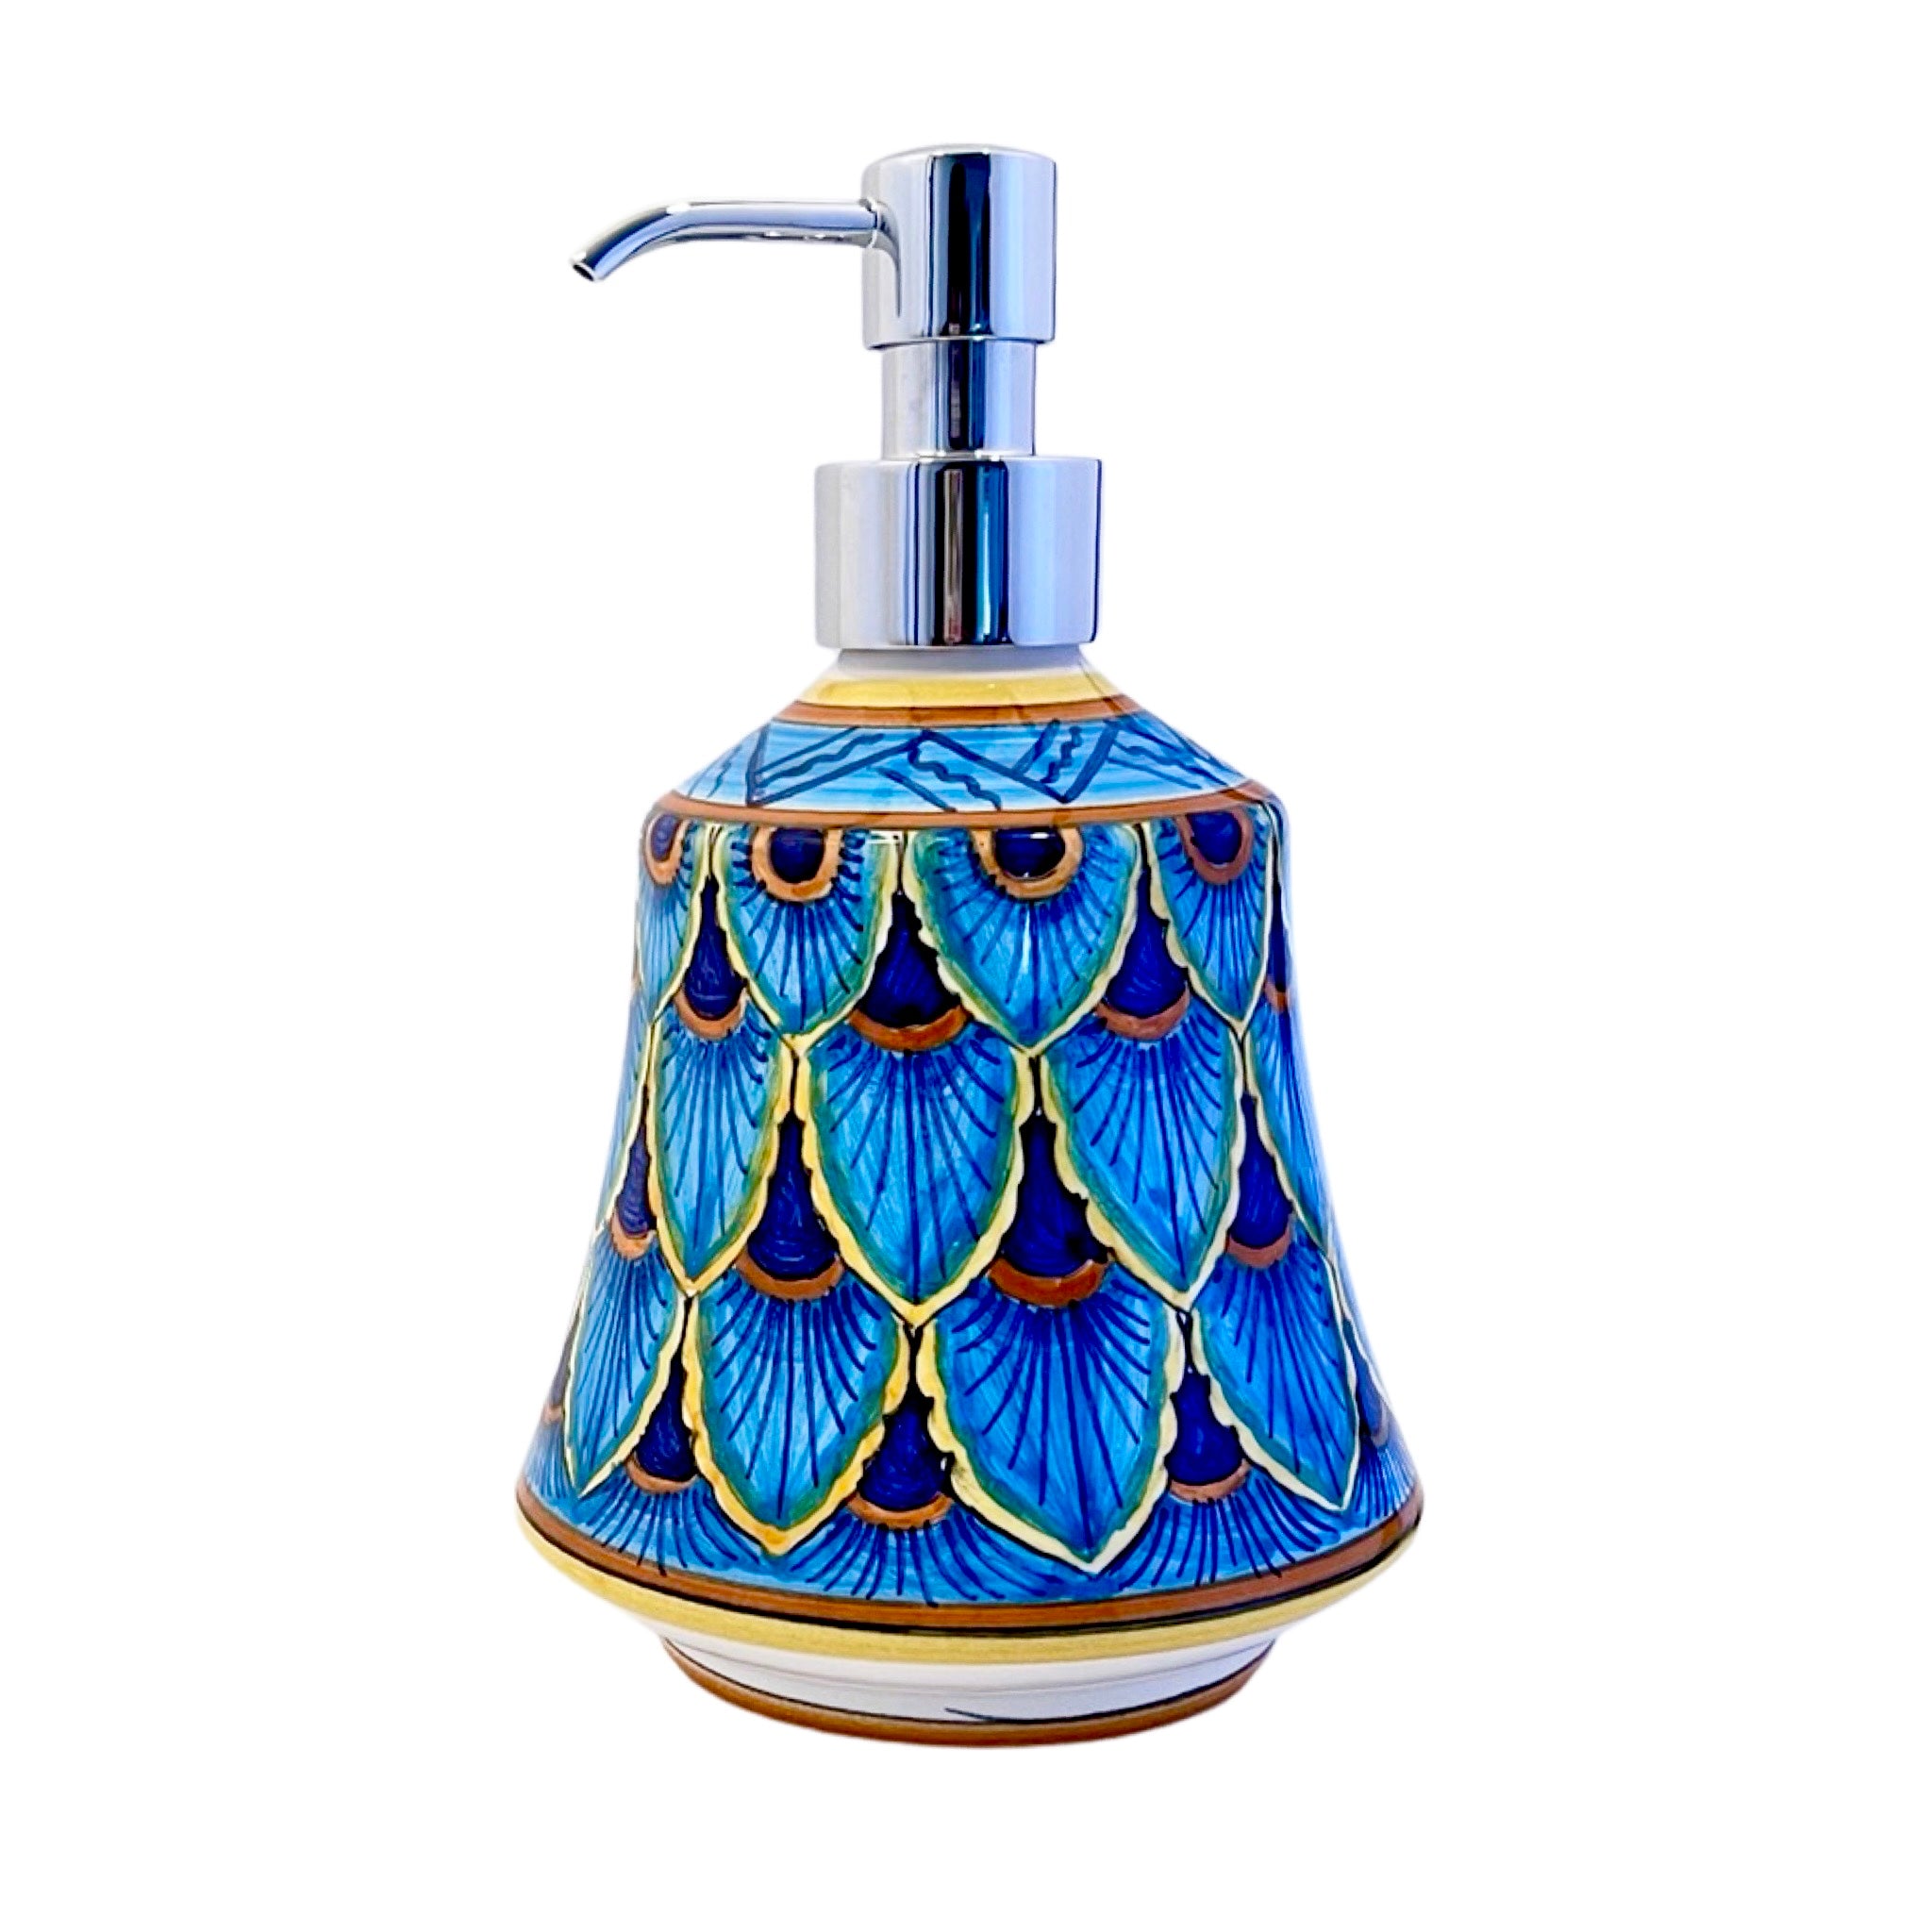 Blue Peacock - Soap Dispenser, ceramics, pottery, italian design, majolica, handmade, handcrafted, handpainted, home decor, kitchen art, home goods, deruta, majolica, Artisan, treasures, traditional art, modern art, gift ideas, style, SF, shop small business, artists, shop online, landmark store, legacy, one of a kind, limited edition, gift guide, gift shop, retail shop, decorations, shopping, italy, home staging, home decorating, home interiors